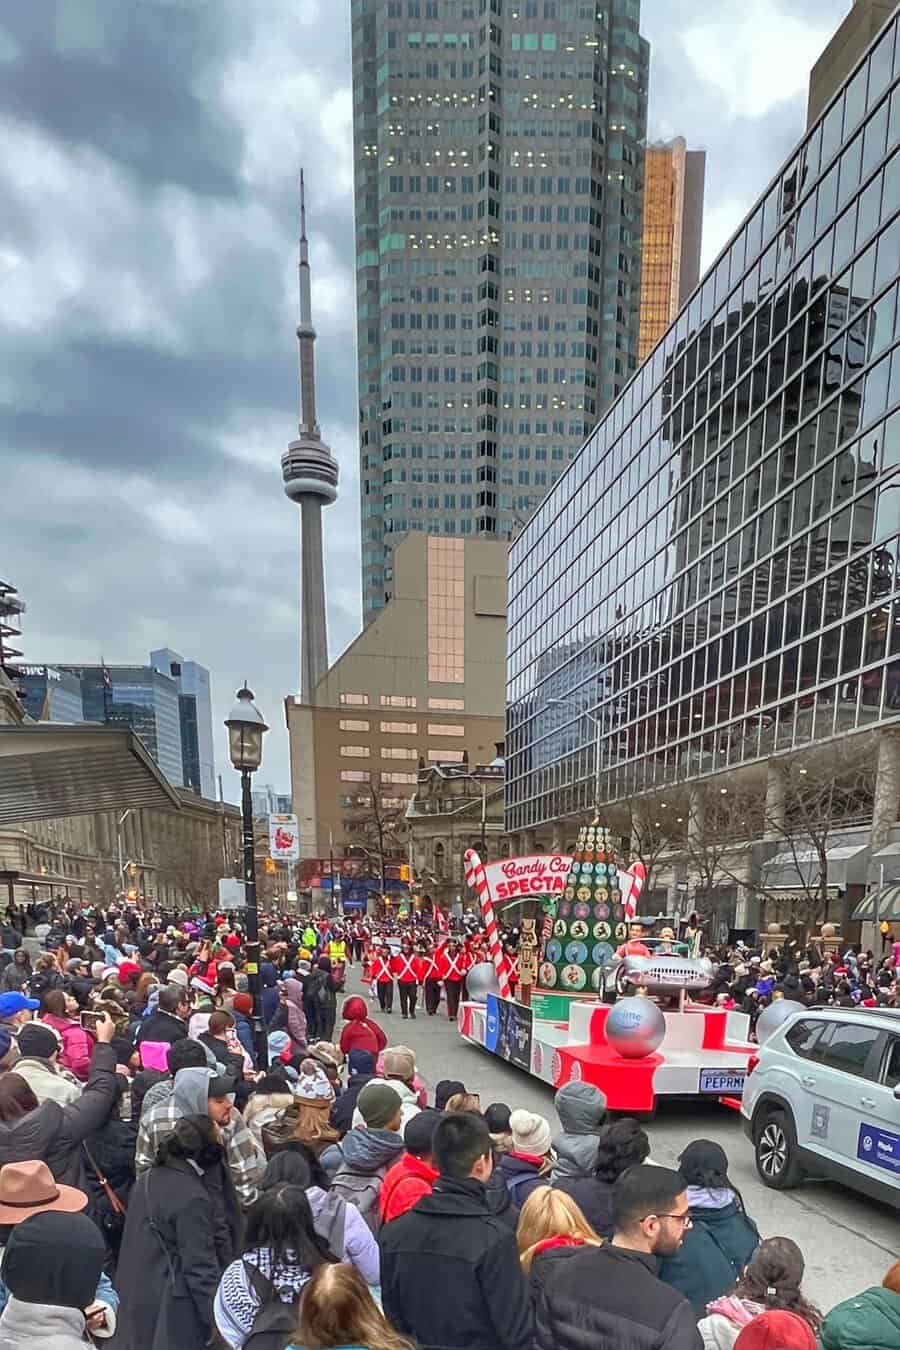 Santa Claus Parade in downtown Toronto with large crowds lining the street to watch and the CN Tower visible in the background. A float with a Christmas Tree is visible in the parade with a marching band behind.